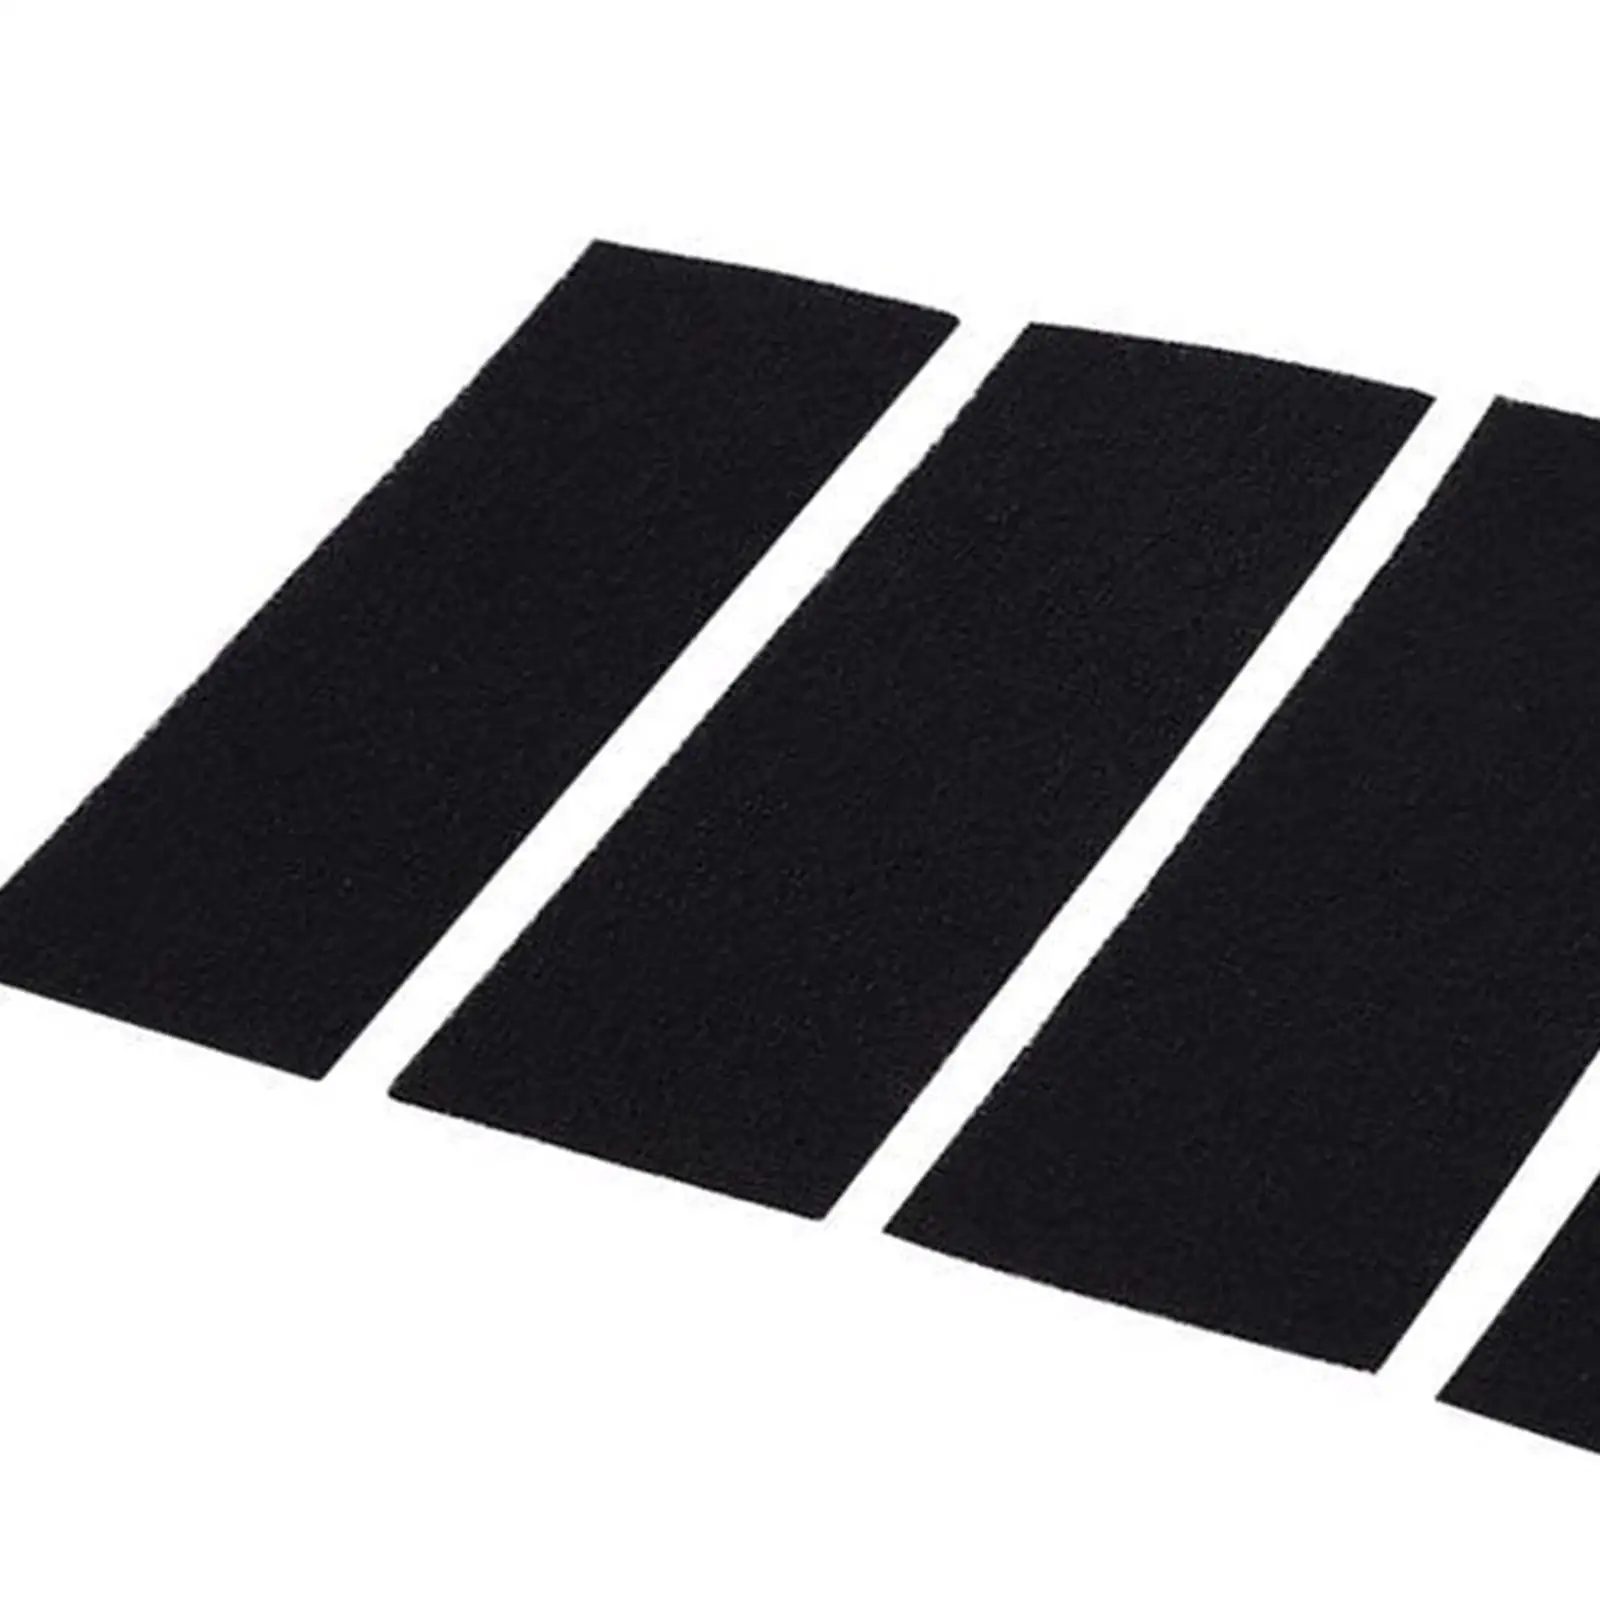 4 Pieces Activated Carbon Filter Rectangle Sponge Direct Replaces Tool Air Filter for Holmes Hap2400 Hap242 Hap412 Hap422